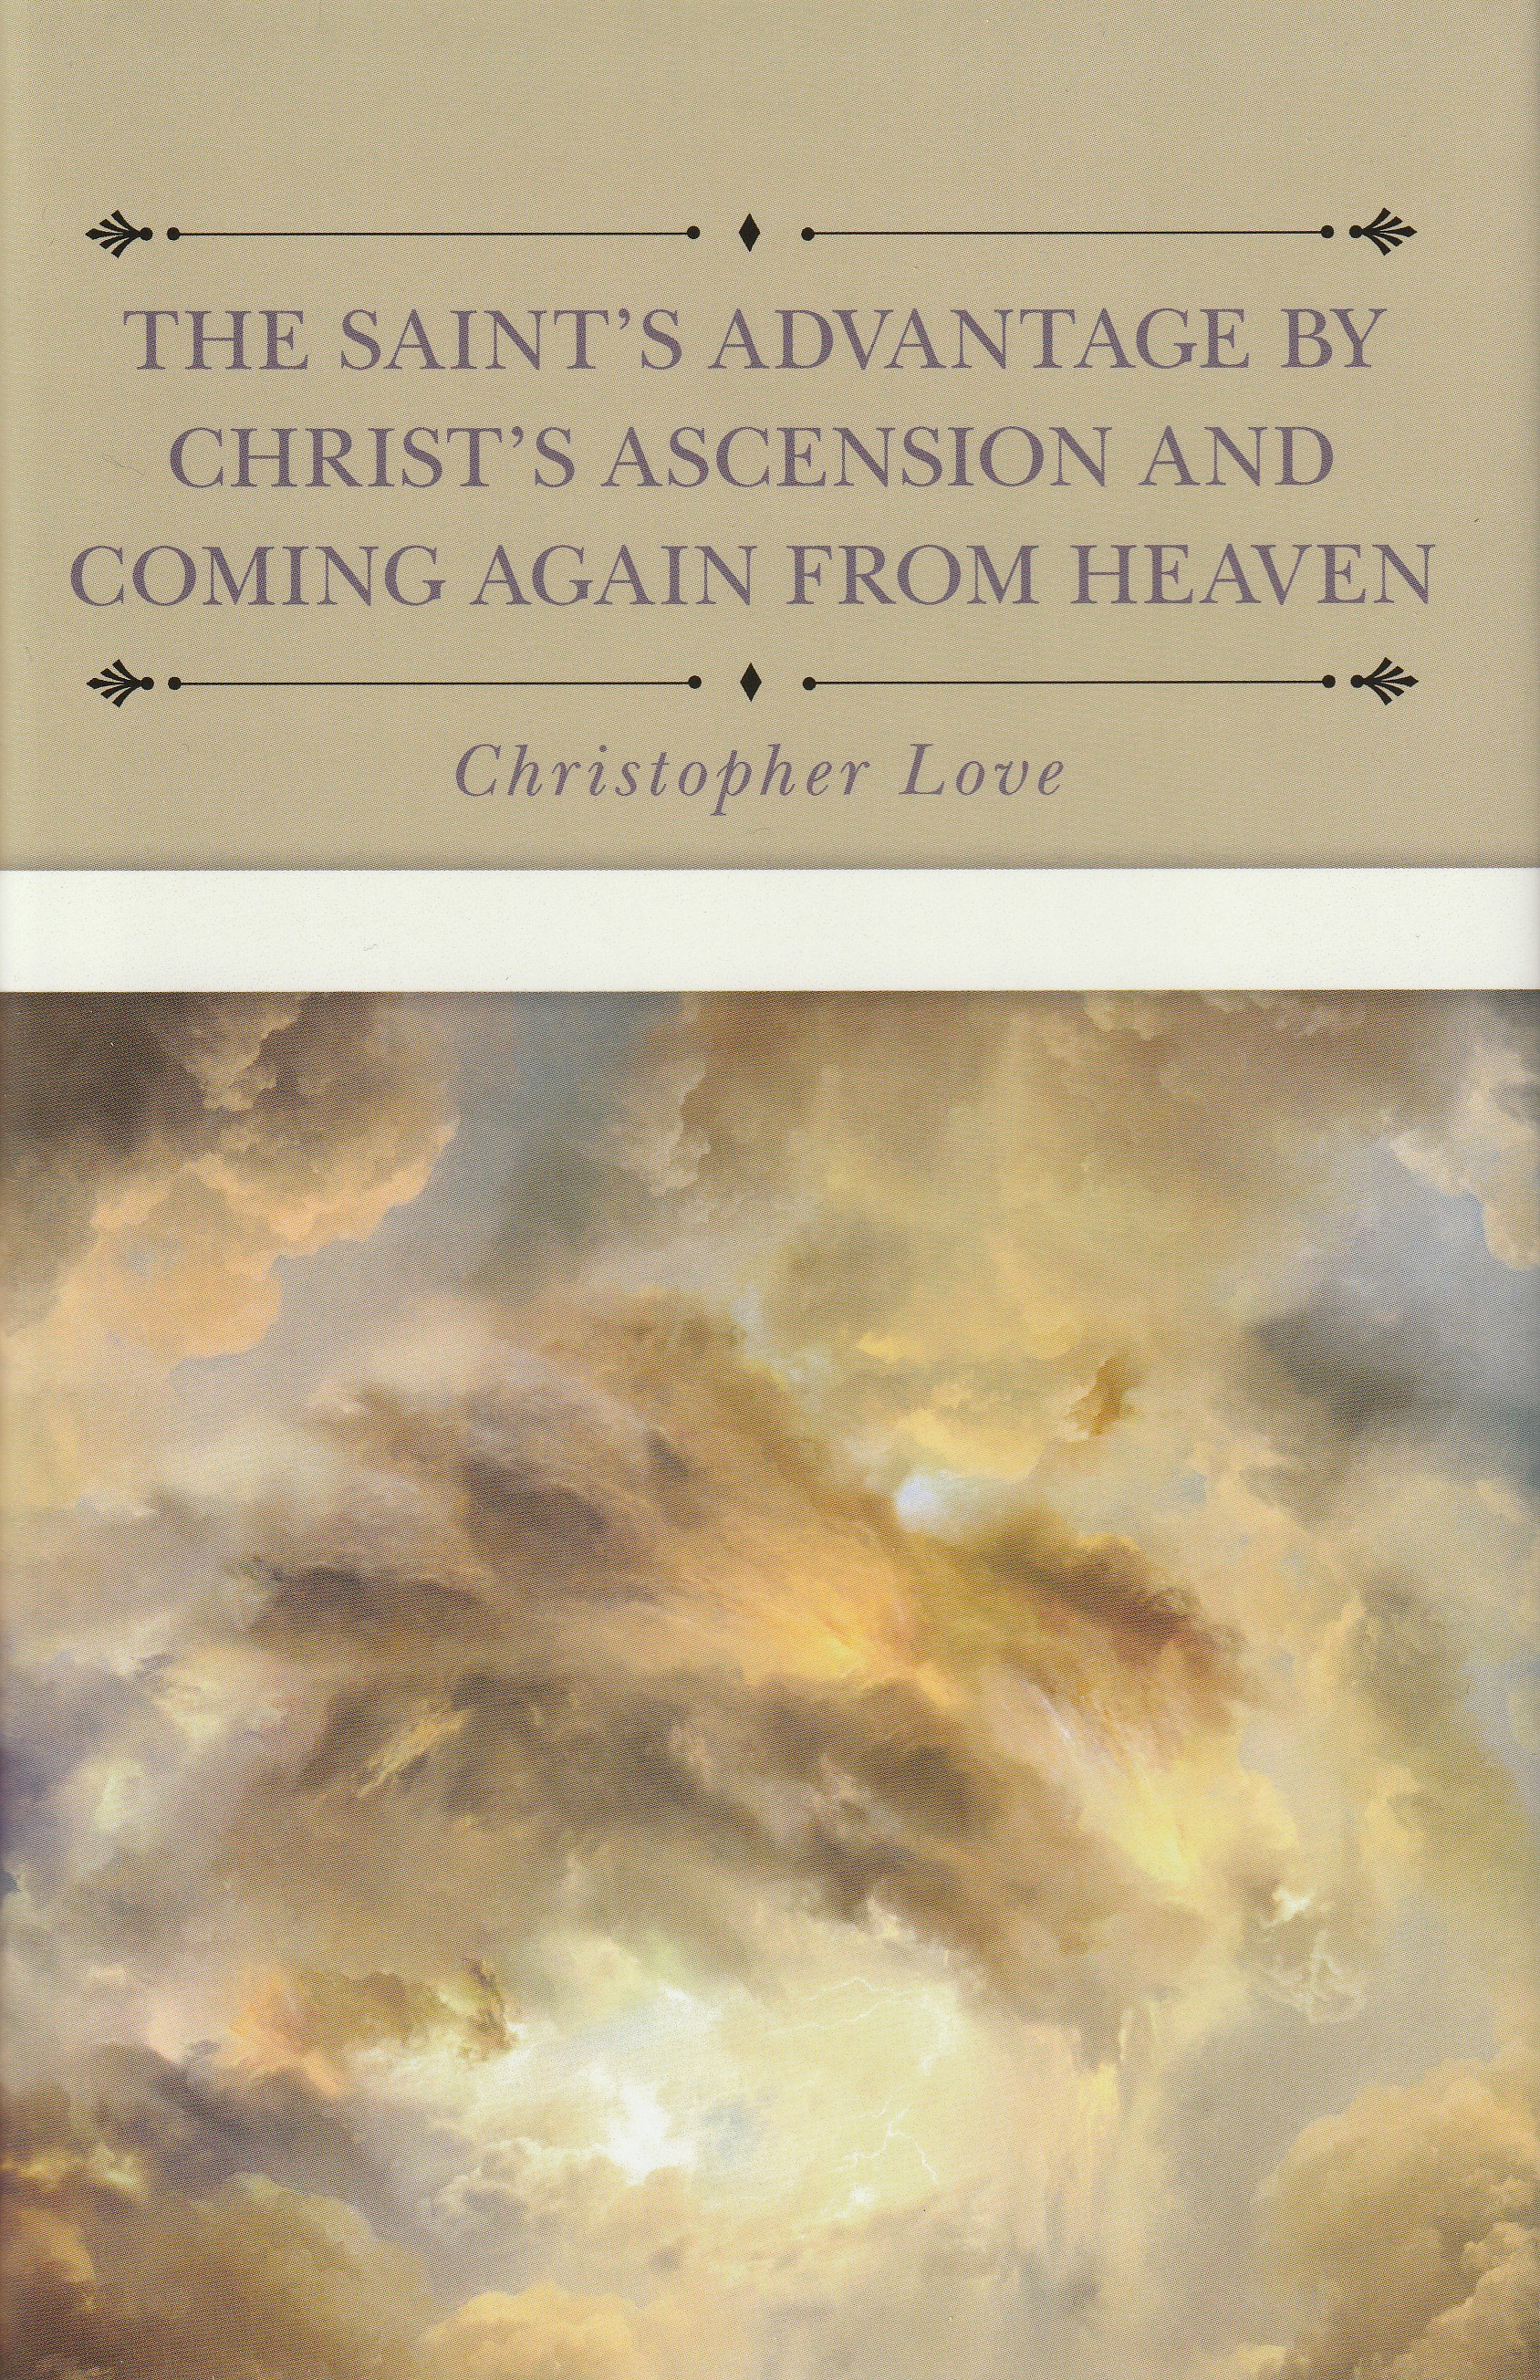 The Saint's Advantage by Christ's Ascension and Coming Again from Heaven